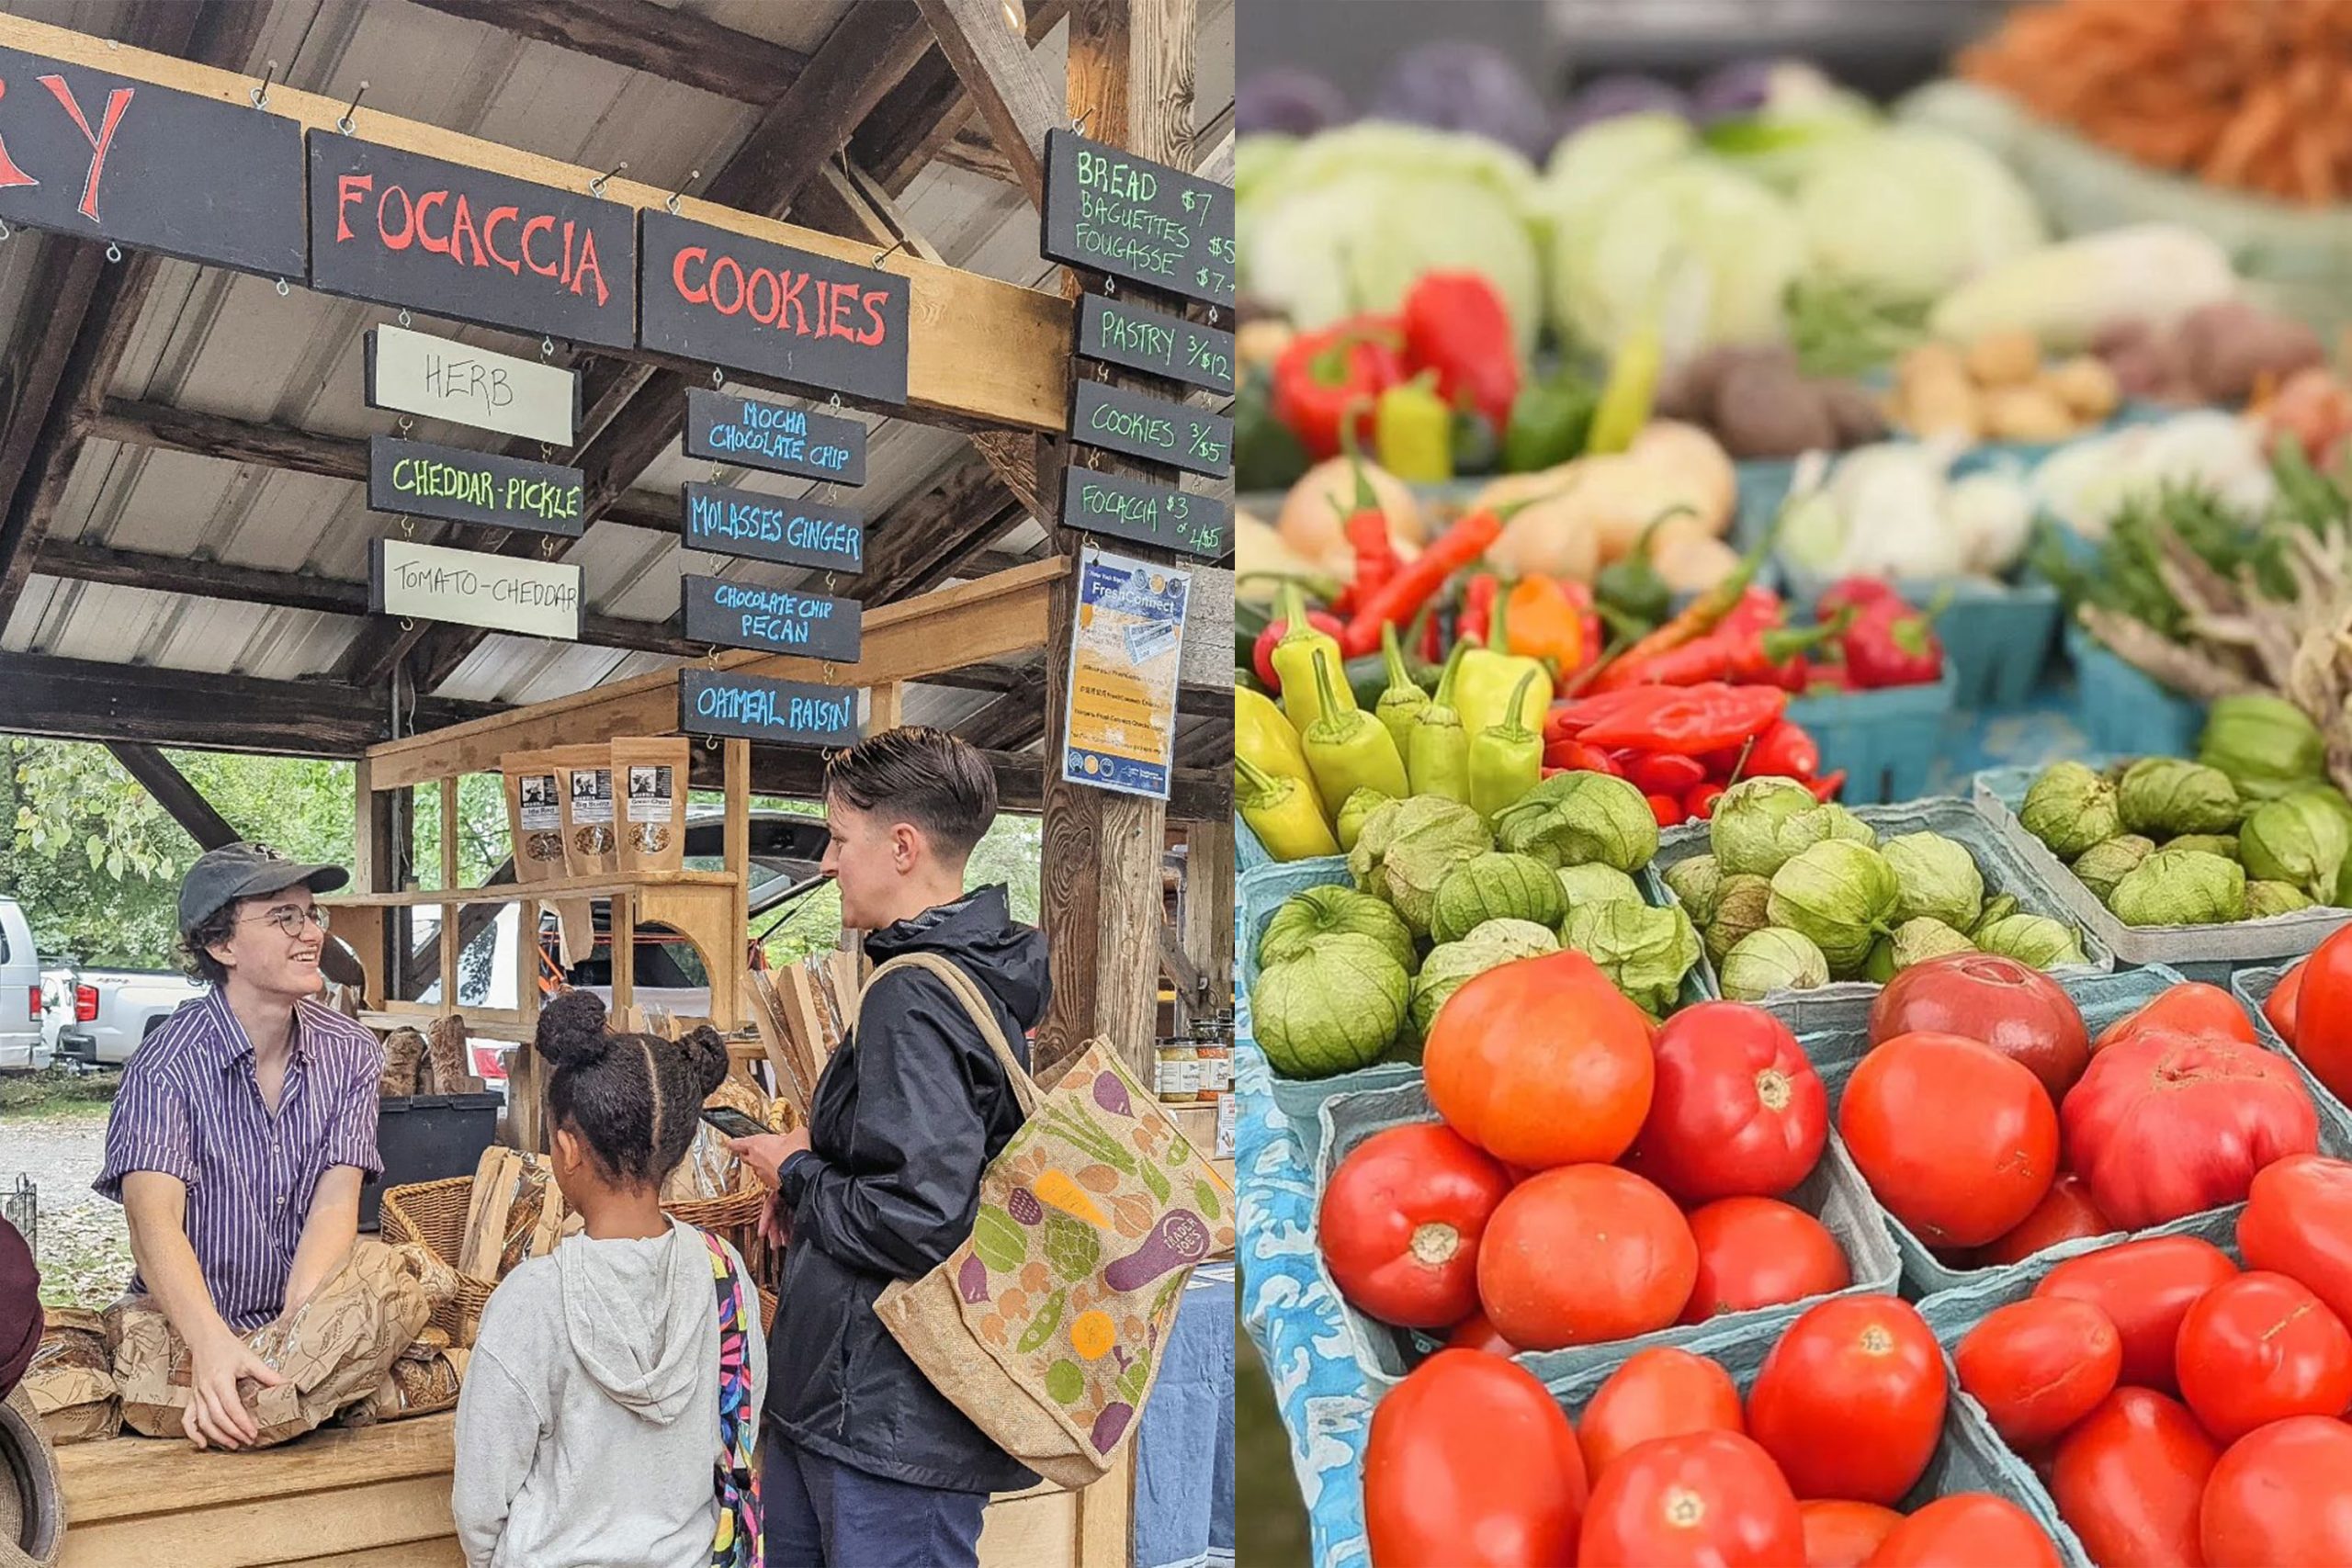 The Ithaca Farmers Market hosts several vendors every weekend, with products ranging from specialty baked goods, dairy products, and fresh produce.